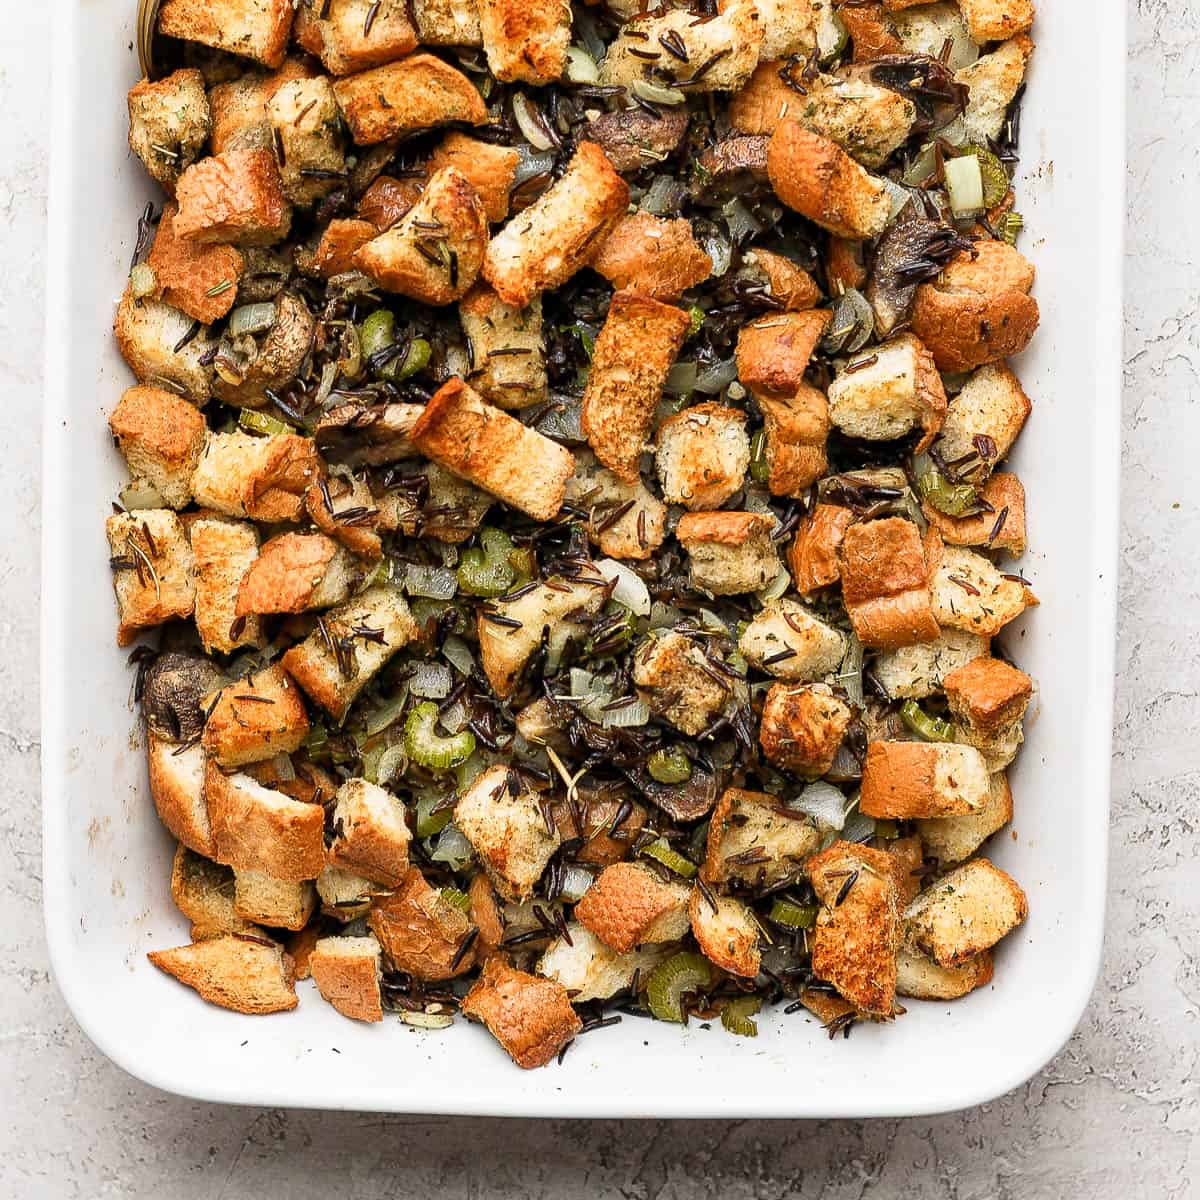 Wild rice stuffing in a baking dish.